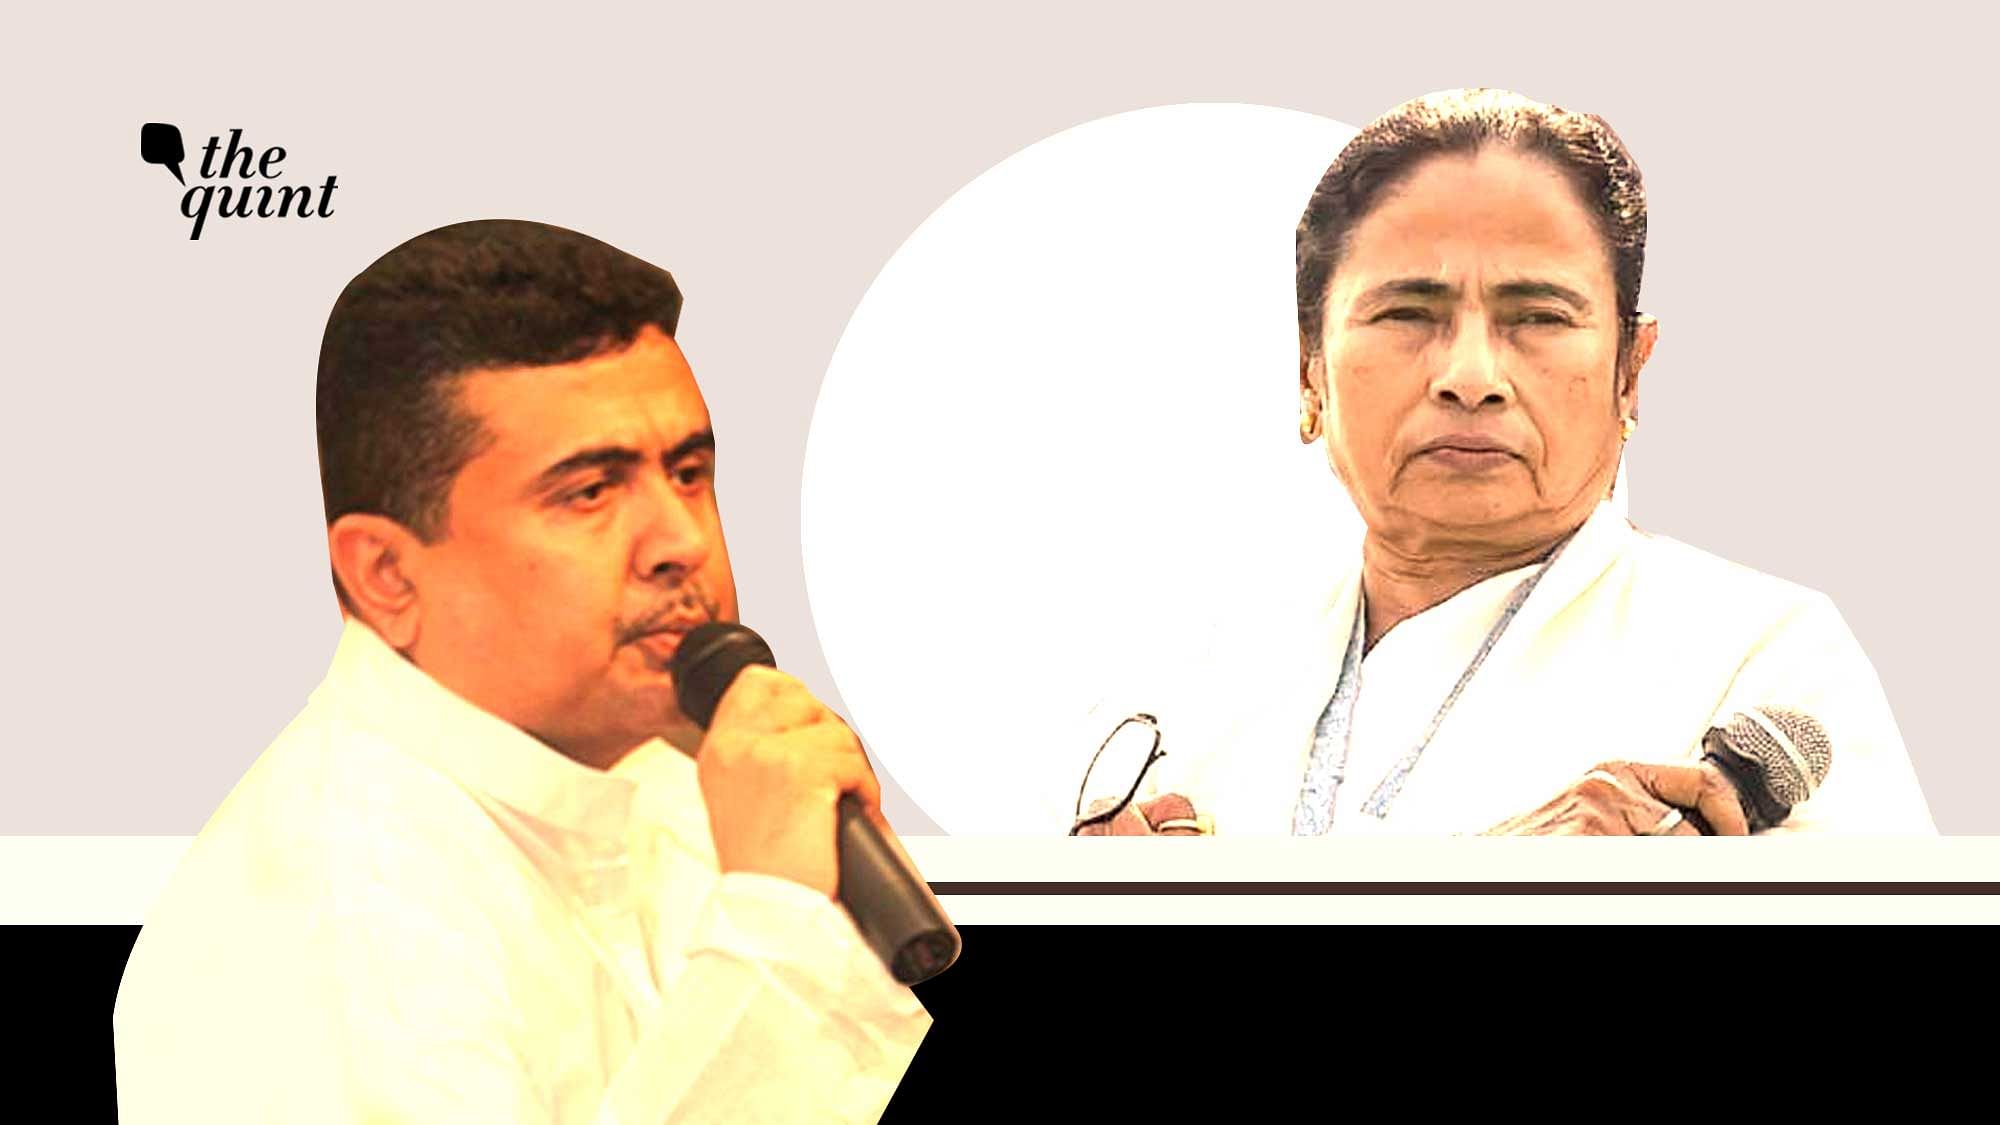 In an open letter addressed to TMC cadre, Adkhikari said “an extremely deep rot and malaise” has set in the party.